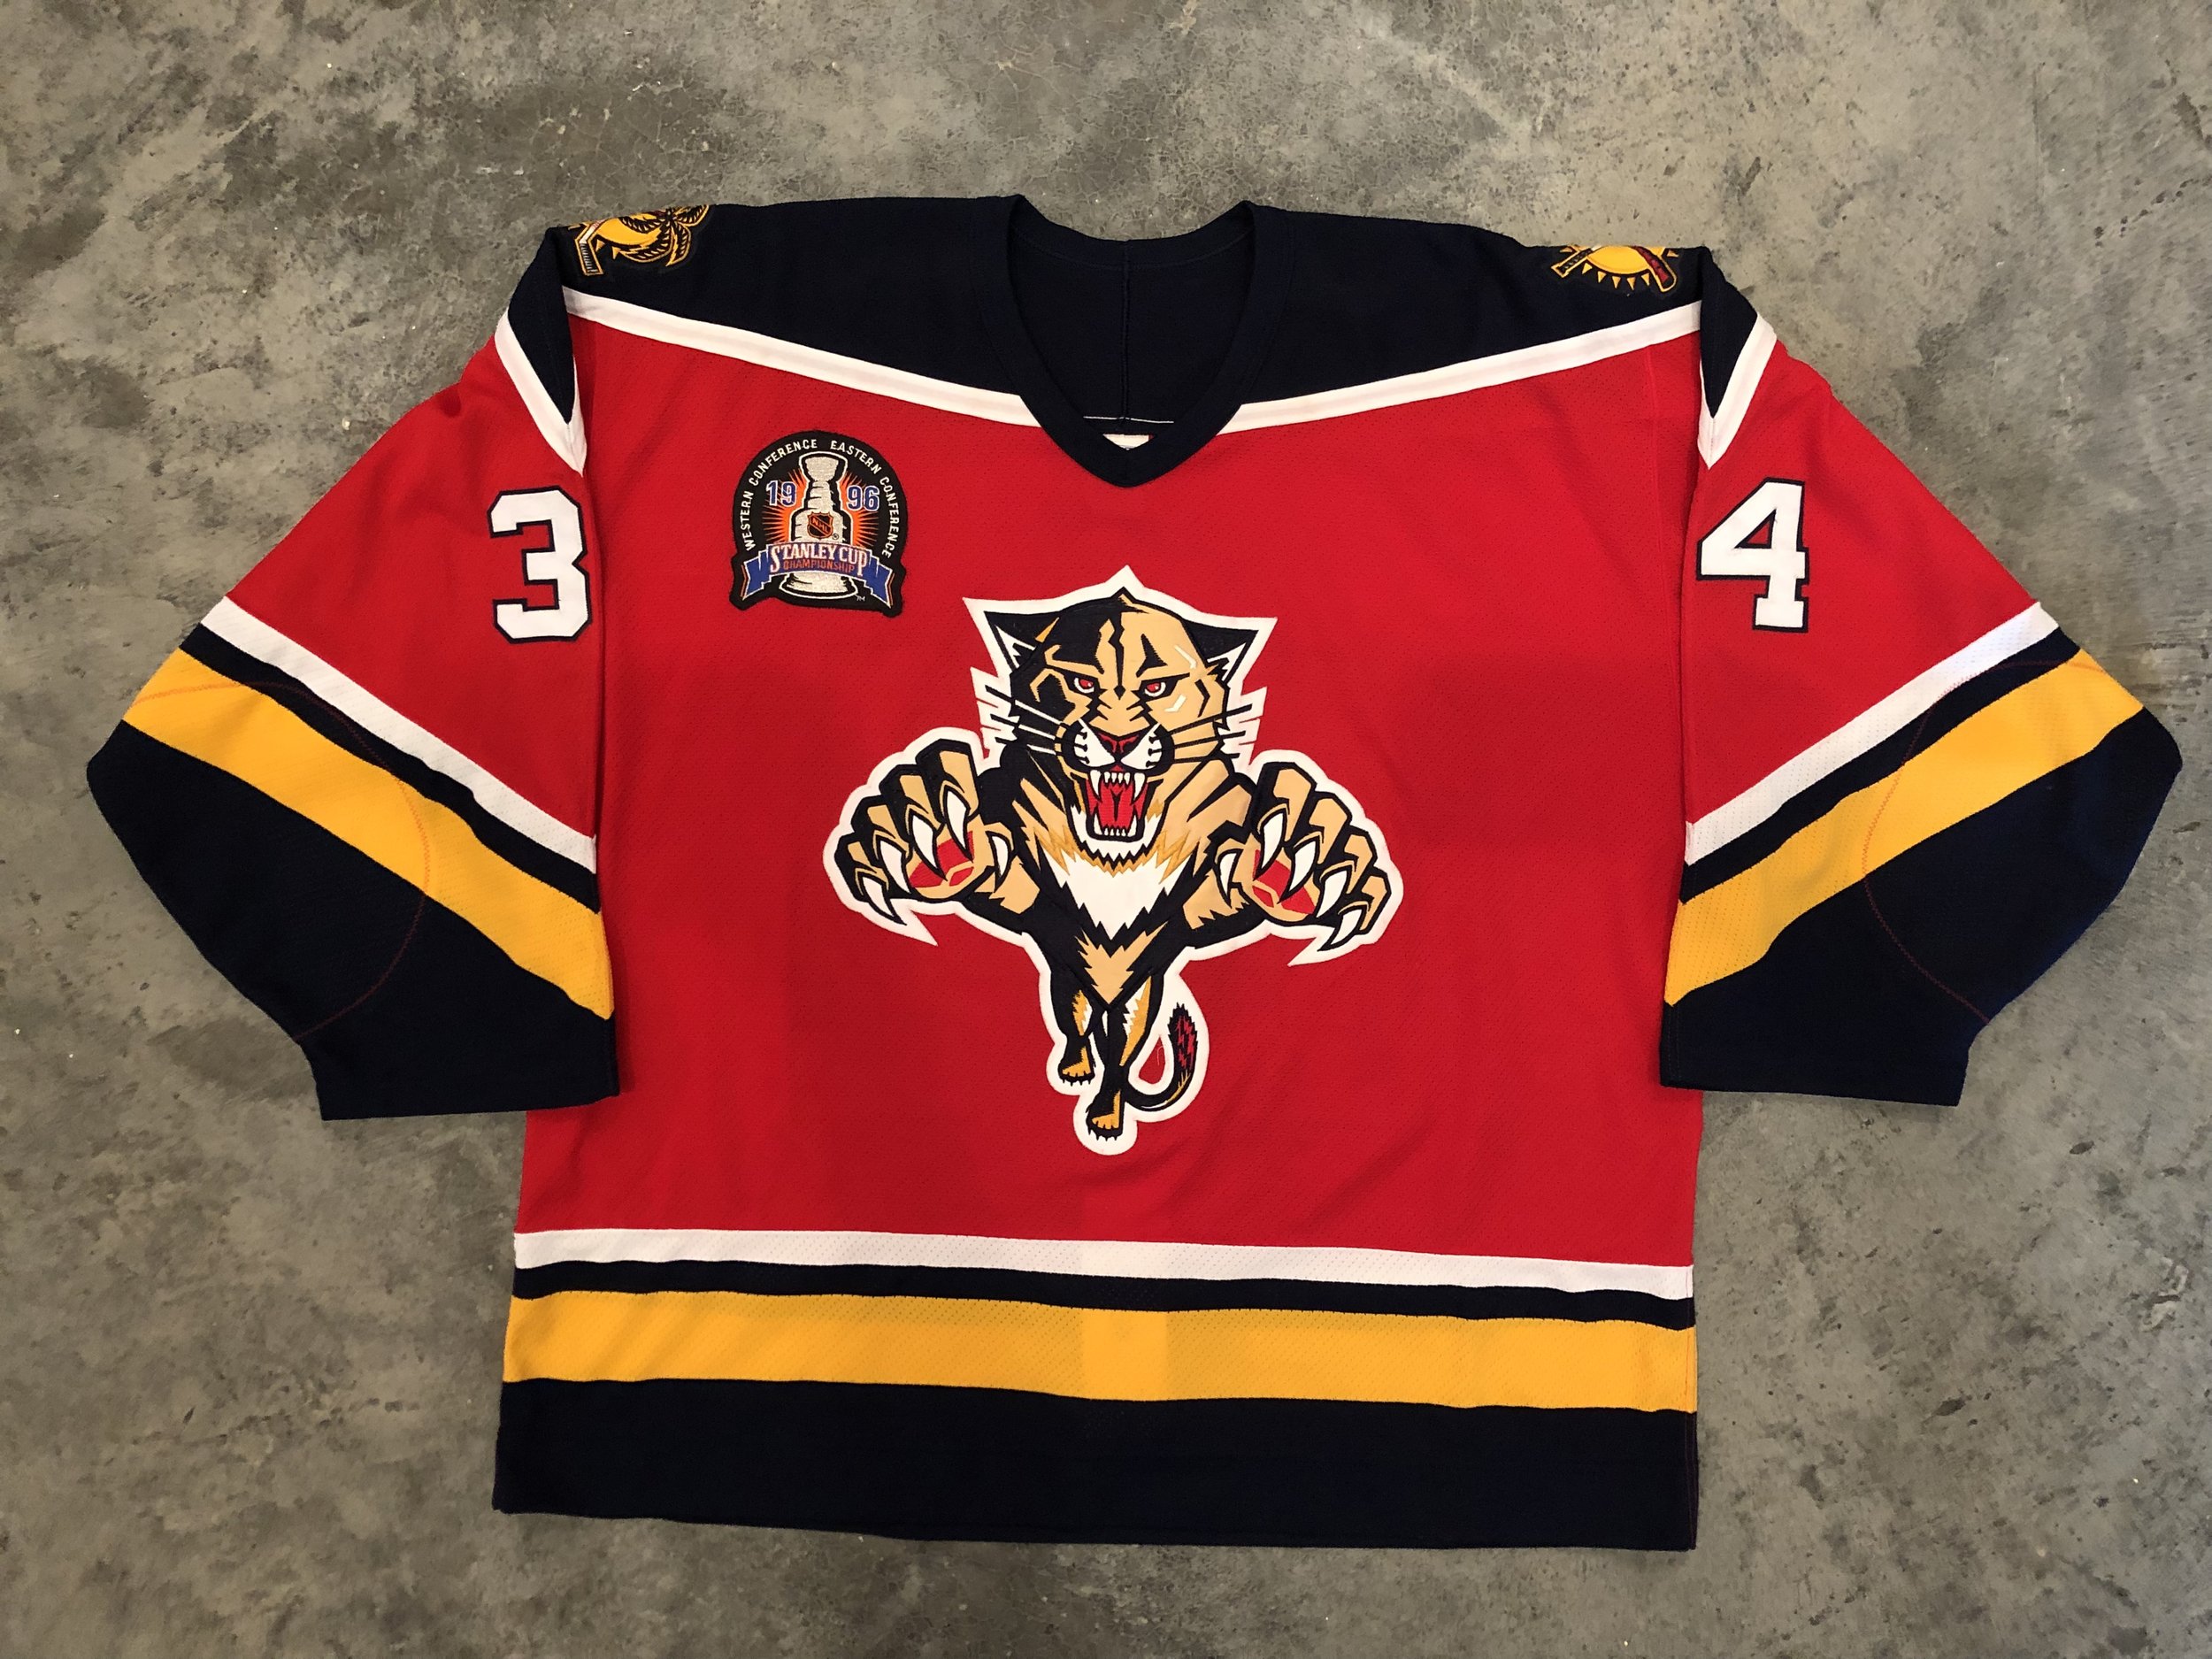 Best and worst sweaters of all-time: Florida Panthers - NBC Sports